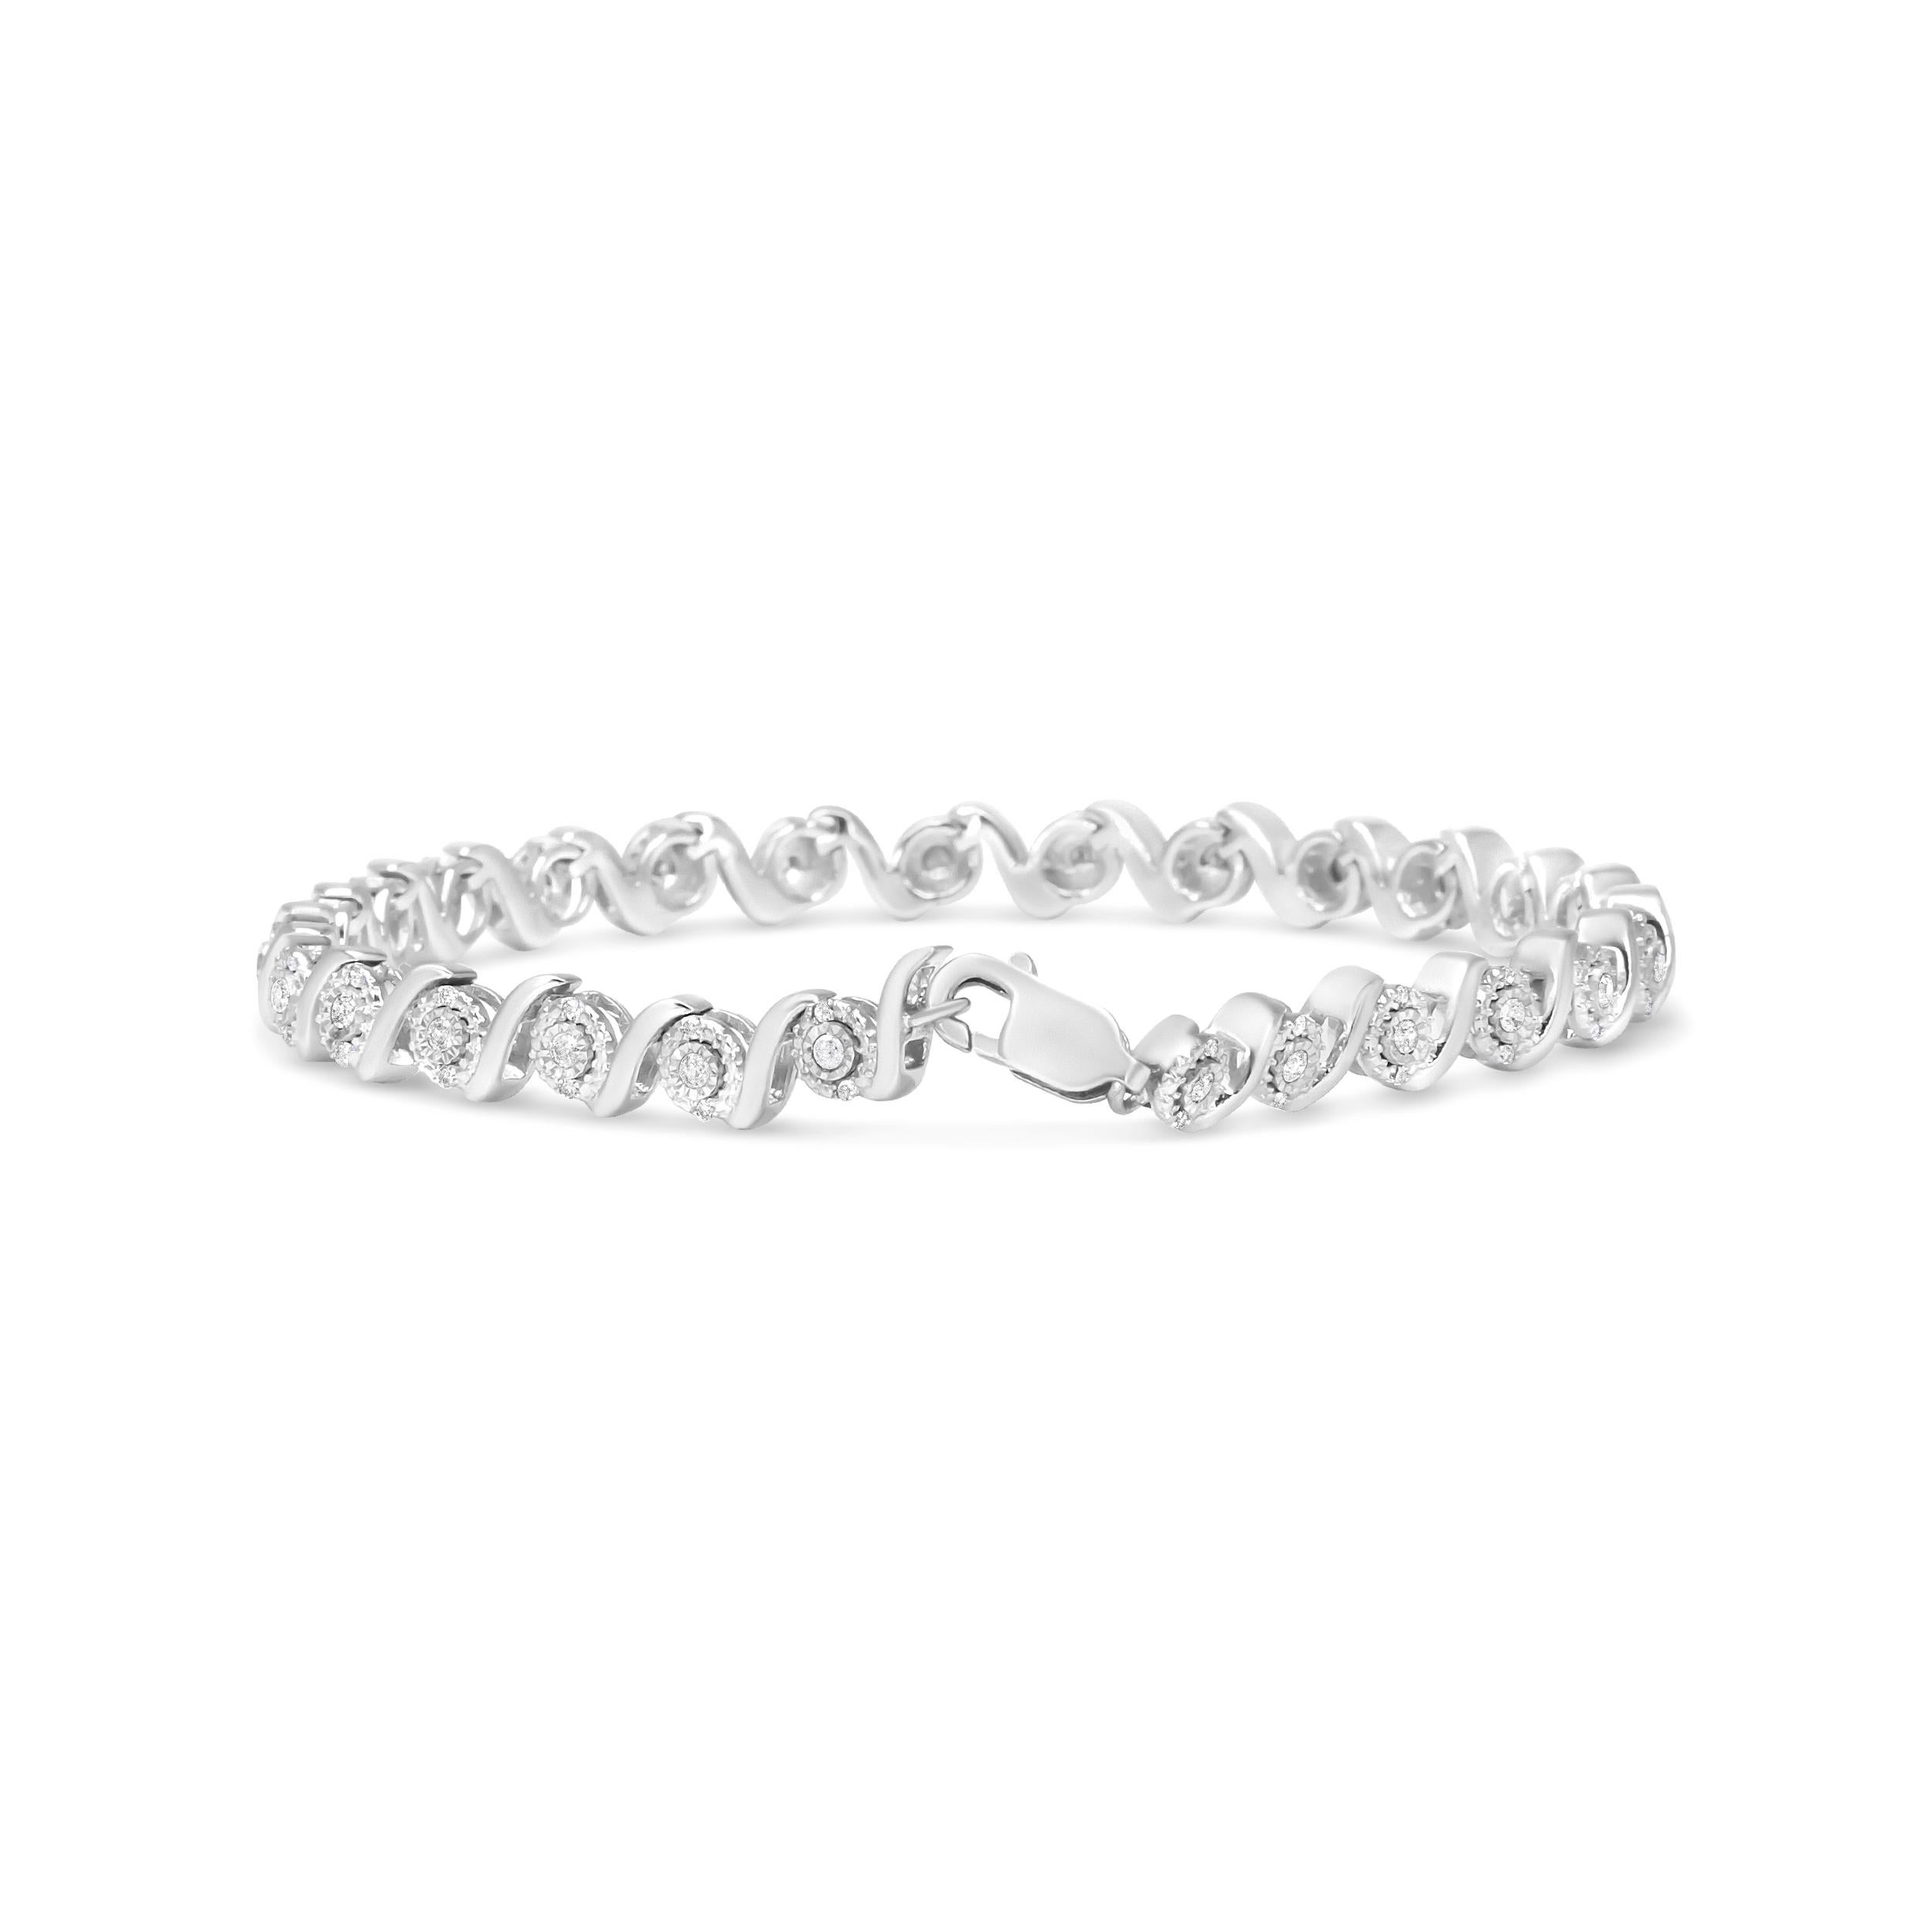 This link bracelet boasts a timeless silhouette of halo links that coordinate with sinuous S-links. The lustrous S-link motifs exude an awe-inspiring appeal along with a brilliant centerpiece diamond cradled in a stone-enhancing miracle plate